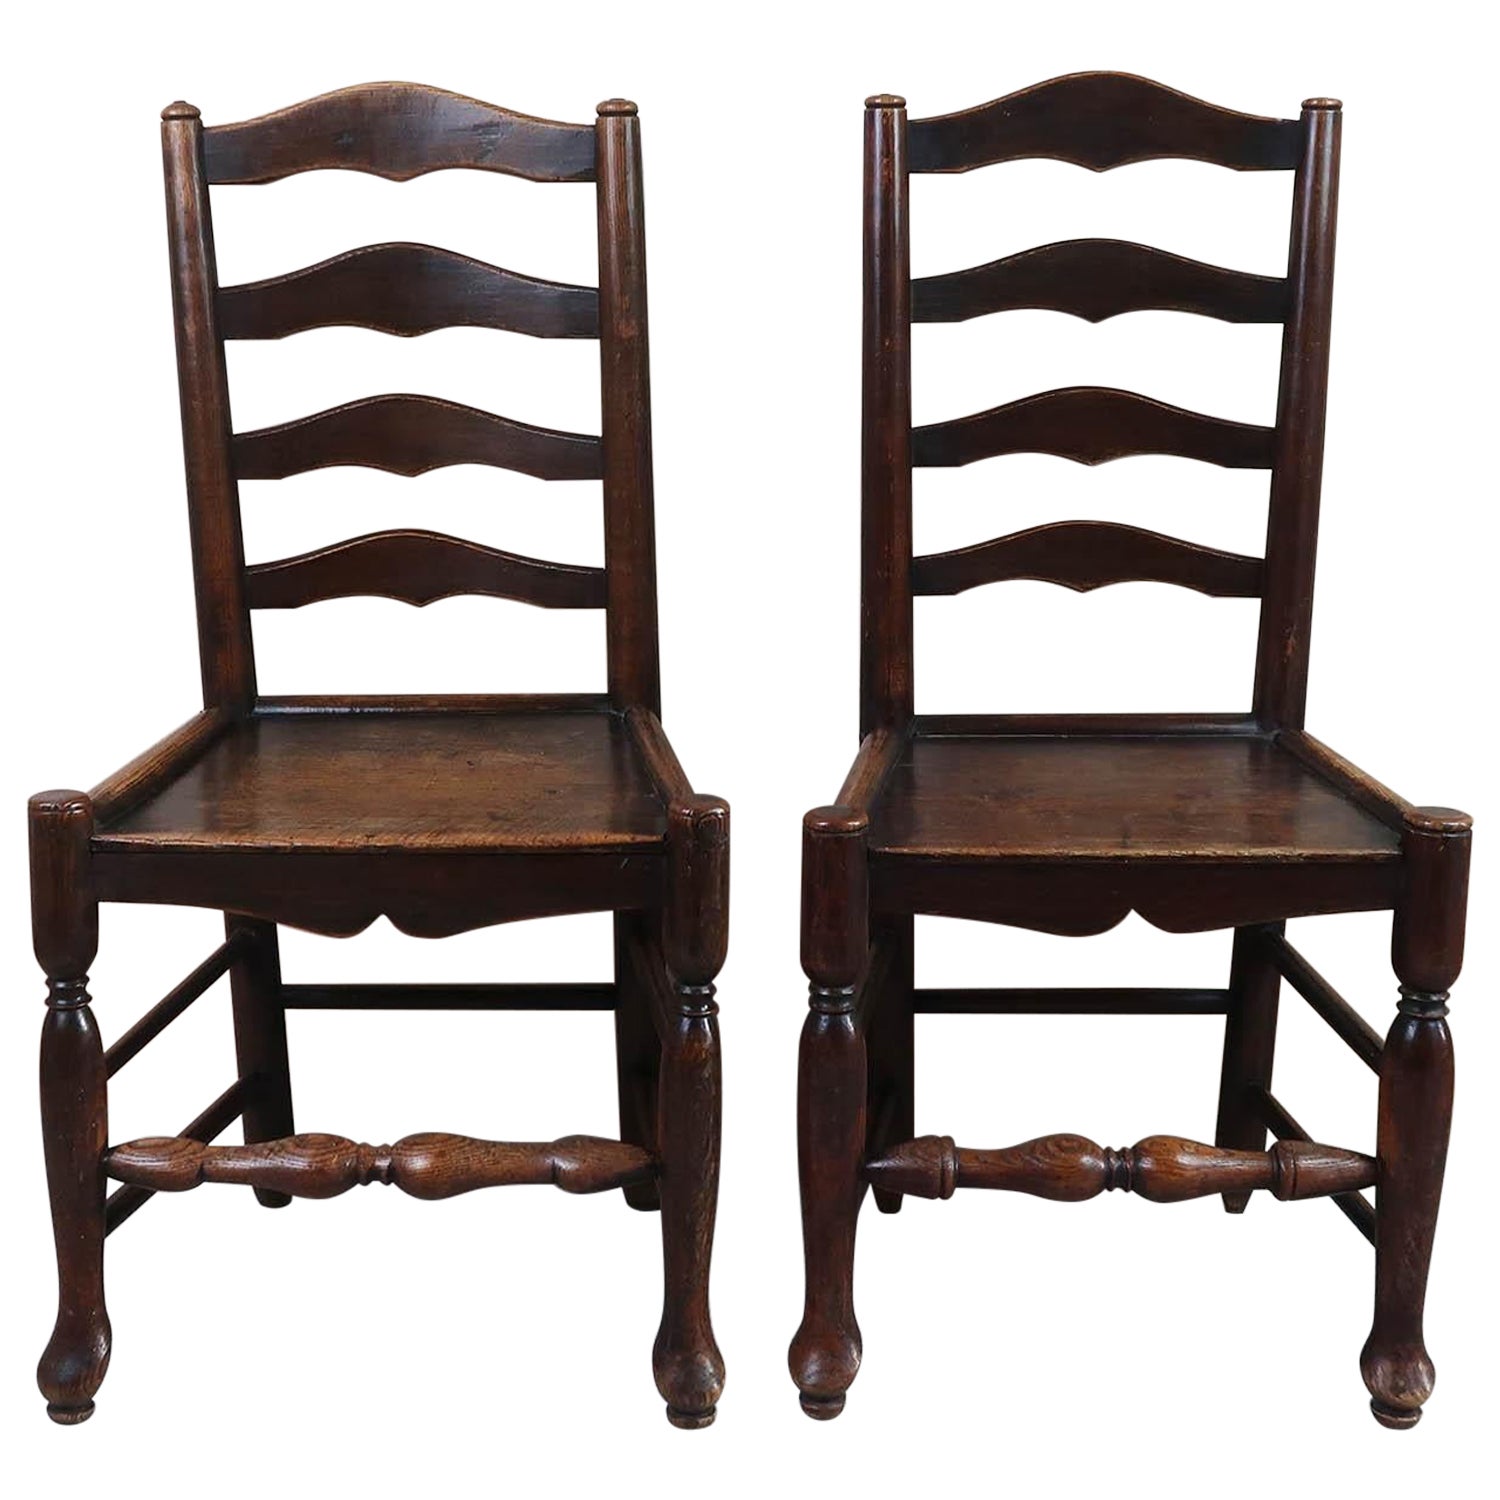 Near Pair of Antique Welsh Country Ladder back Chairs. C.1800 For Sale